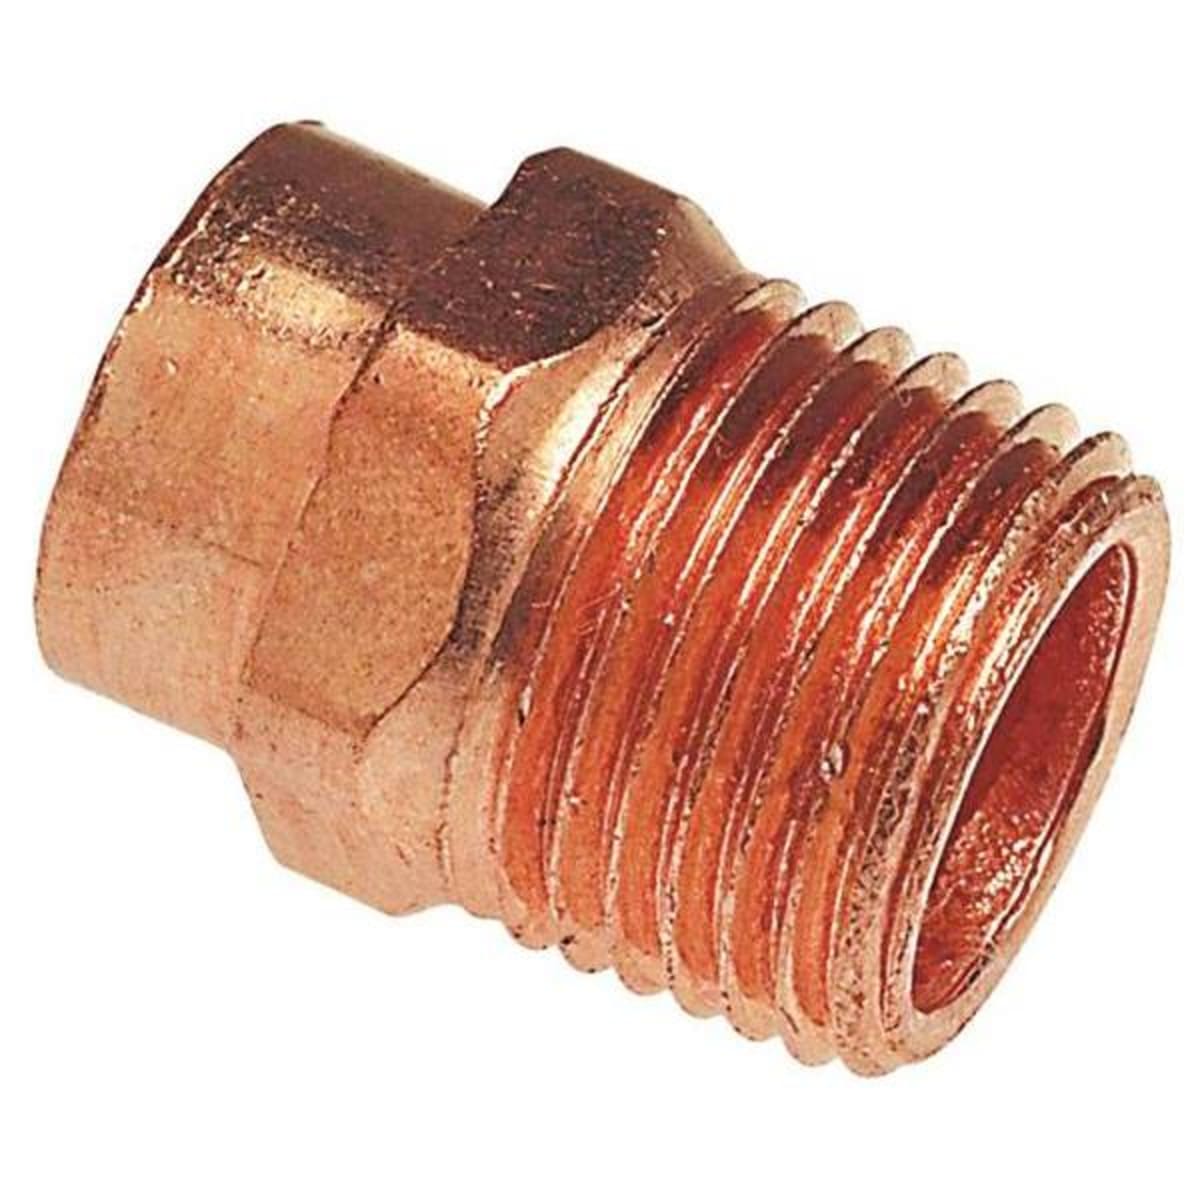 Everbilt 1/2 in. Copper Pressure Cup X MPT Adapter Fitting Pro